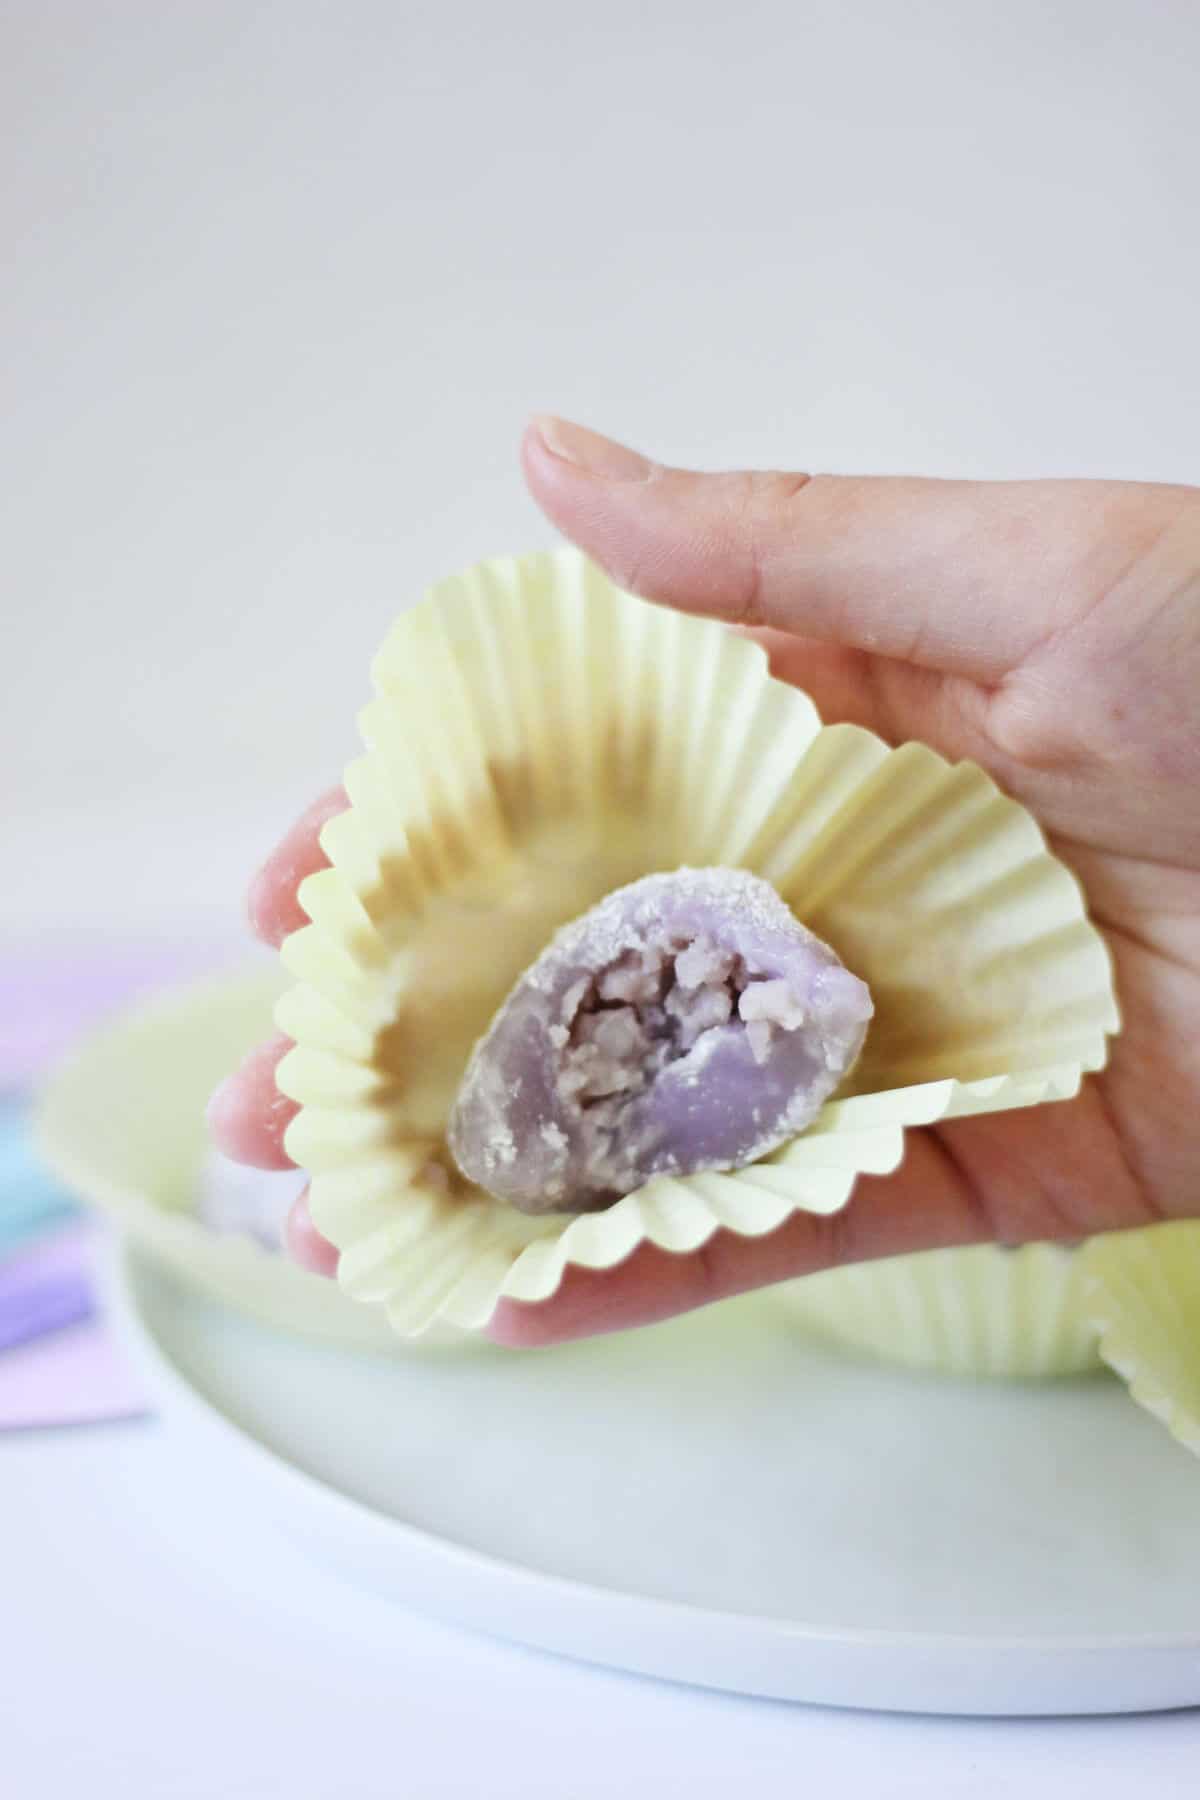 Hand holding a cupcake wrapper with a piece of purple mochi filled with mashed taro.